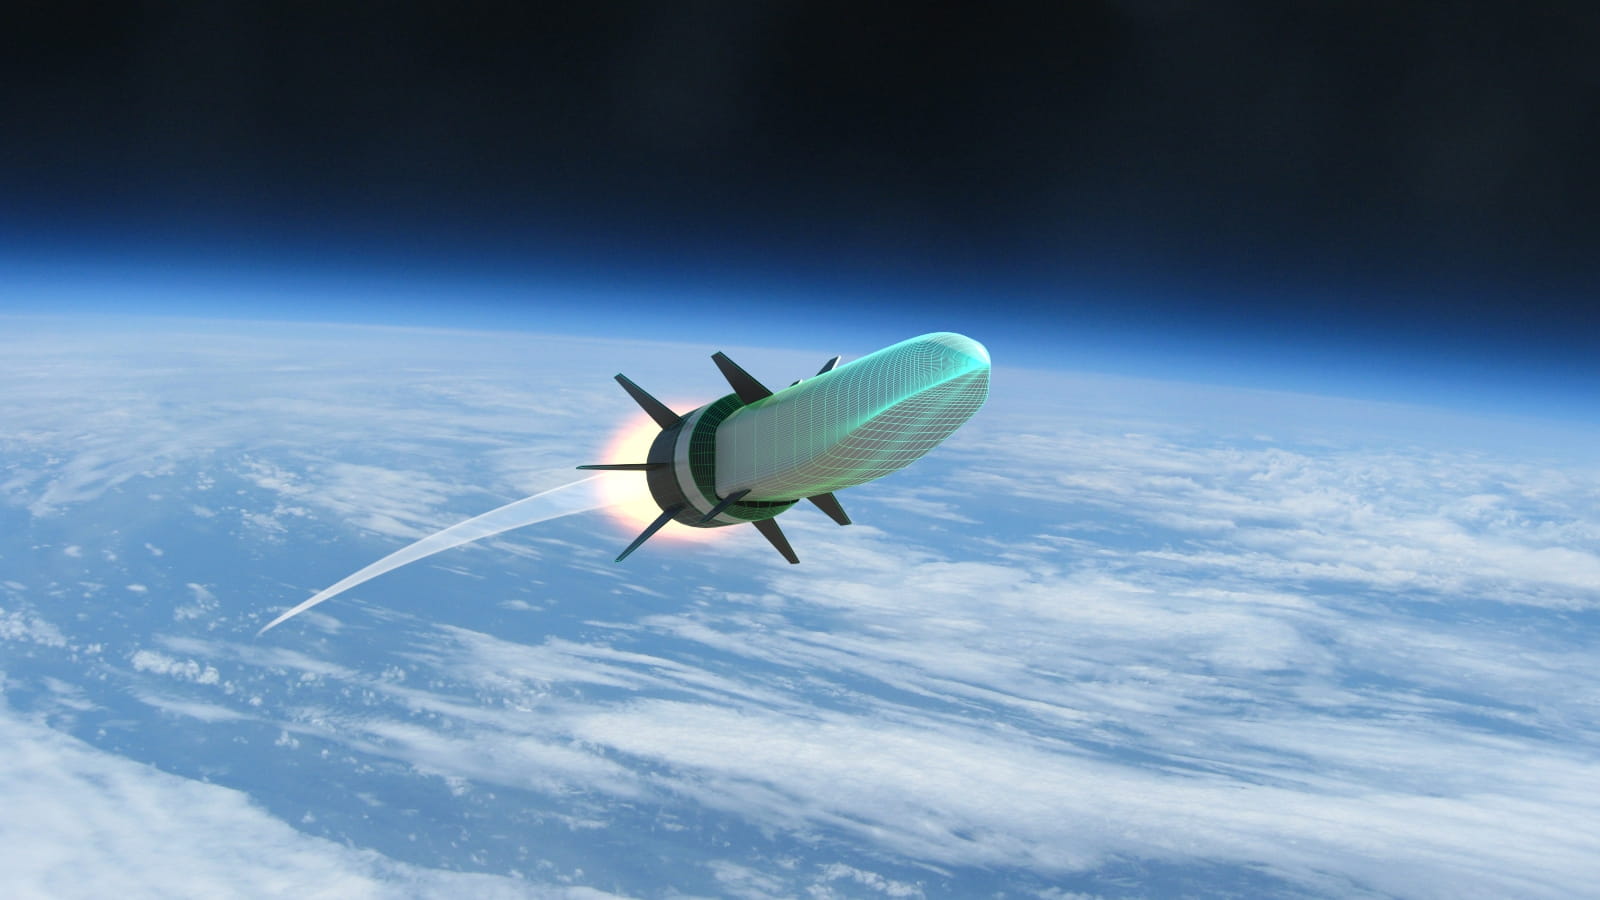 Raytheon successfully tested a hypersonic cruise missile for the second time in a row